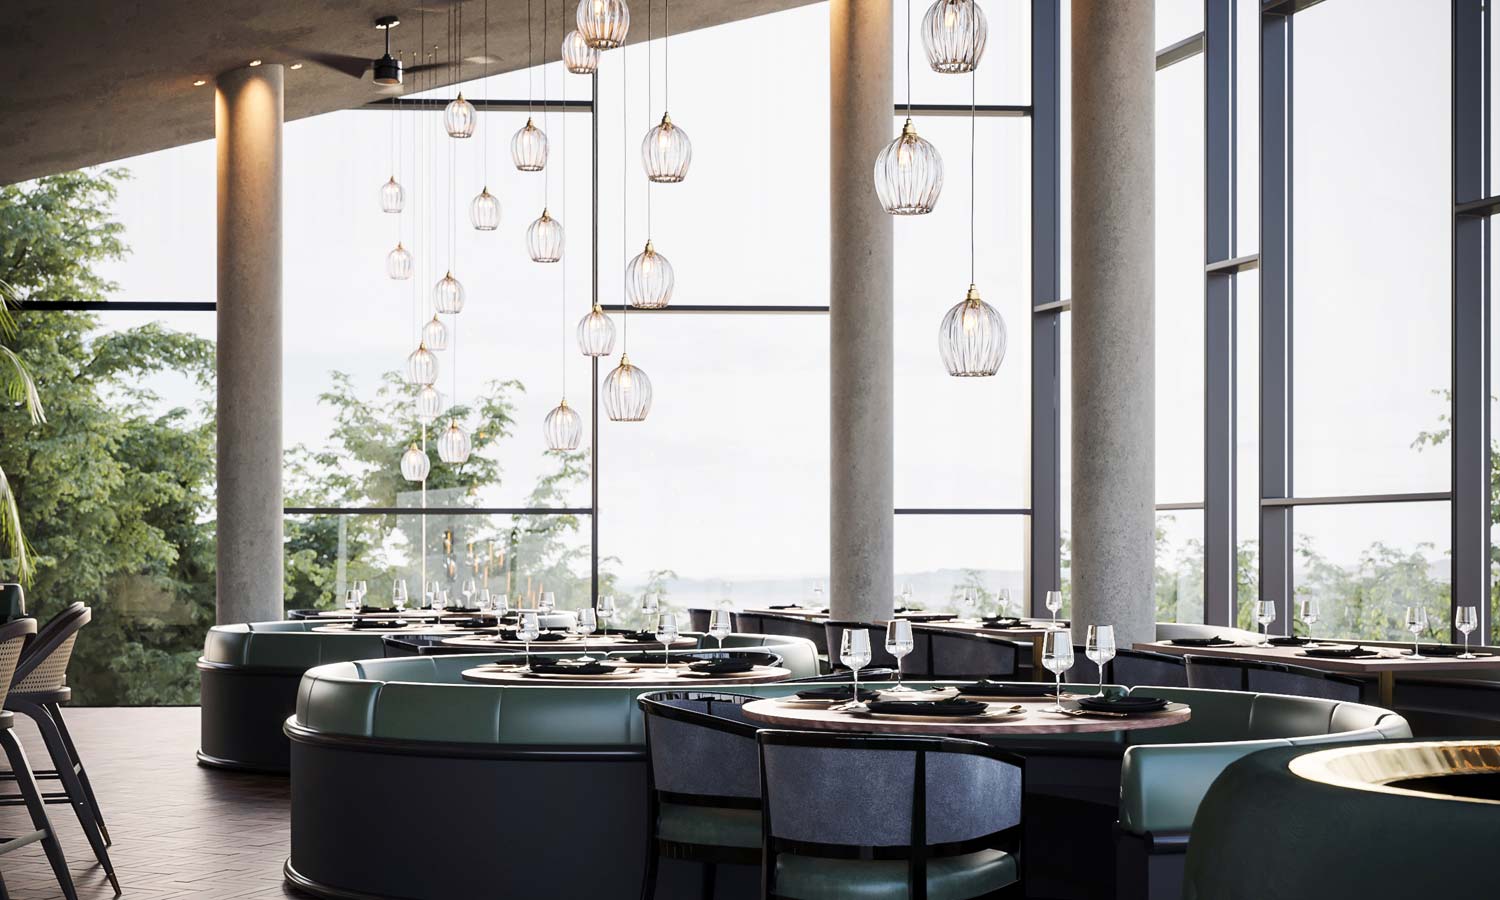 The Wimbledon Cluster Eatery where fine ribbed cluster chandeliers - designed and handmade in Britain - present intimate luminous solutions to nooks, booths and other dining concepts in the restaurant..